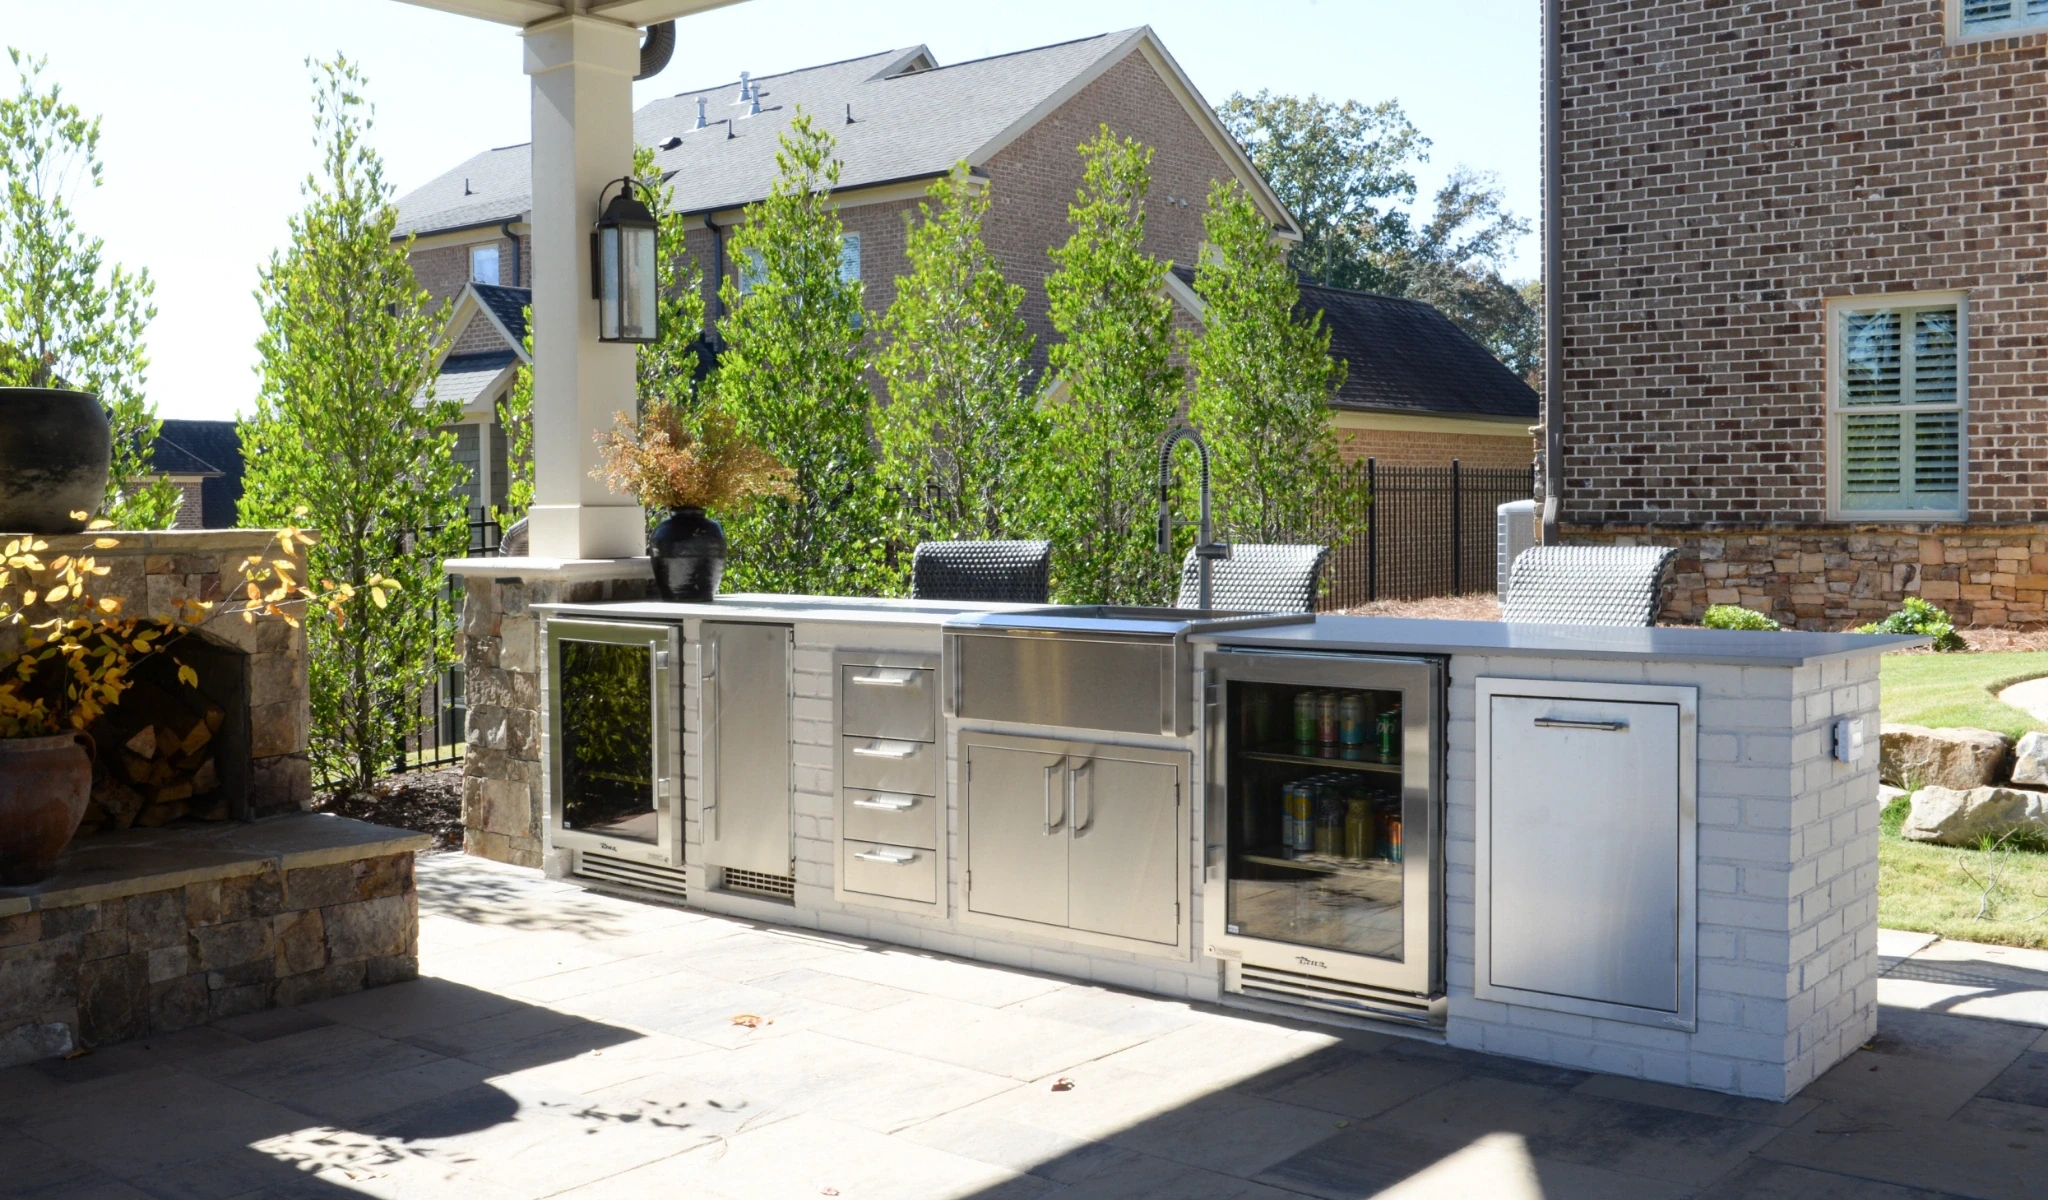 A new outdoor kitchen with stainless steel appliances and a fireplace.